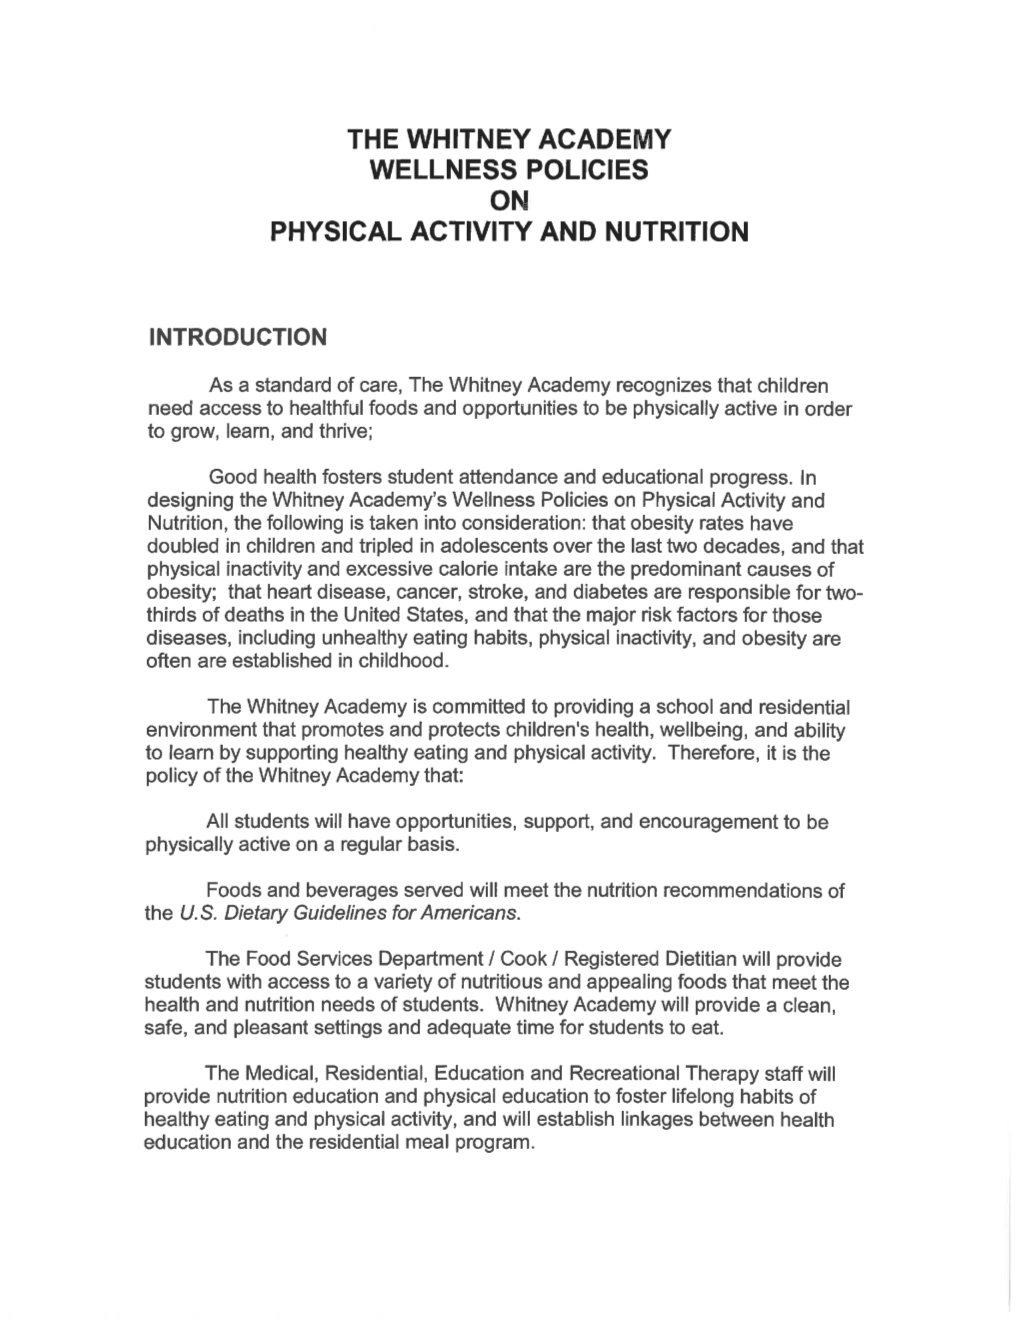 Wellness Policies on Physical Activity and Nutrition